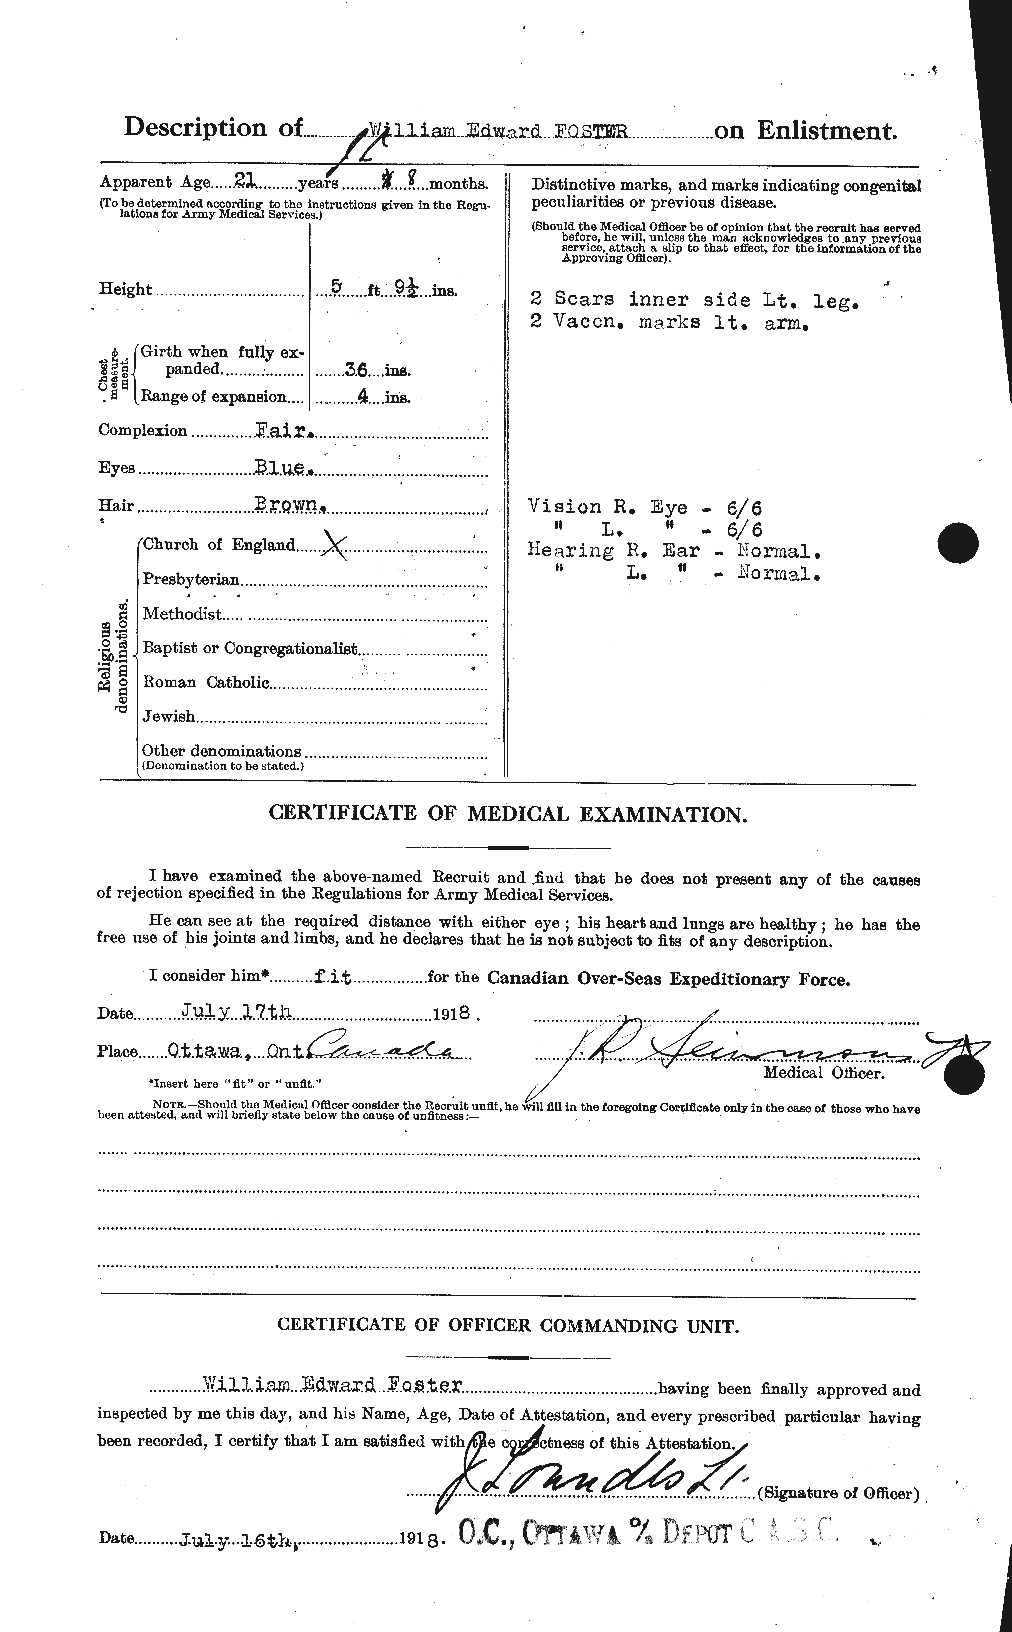 Personnel Records of the First World War - CEF 328740b